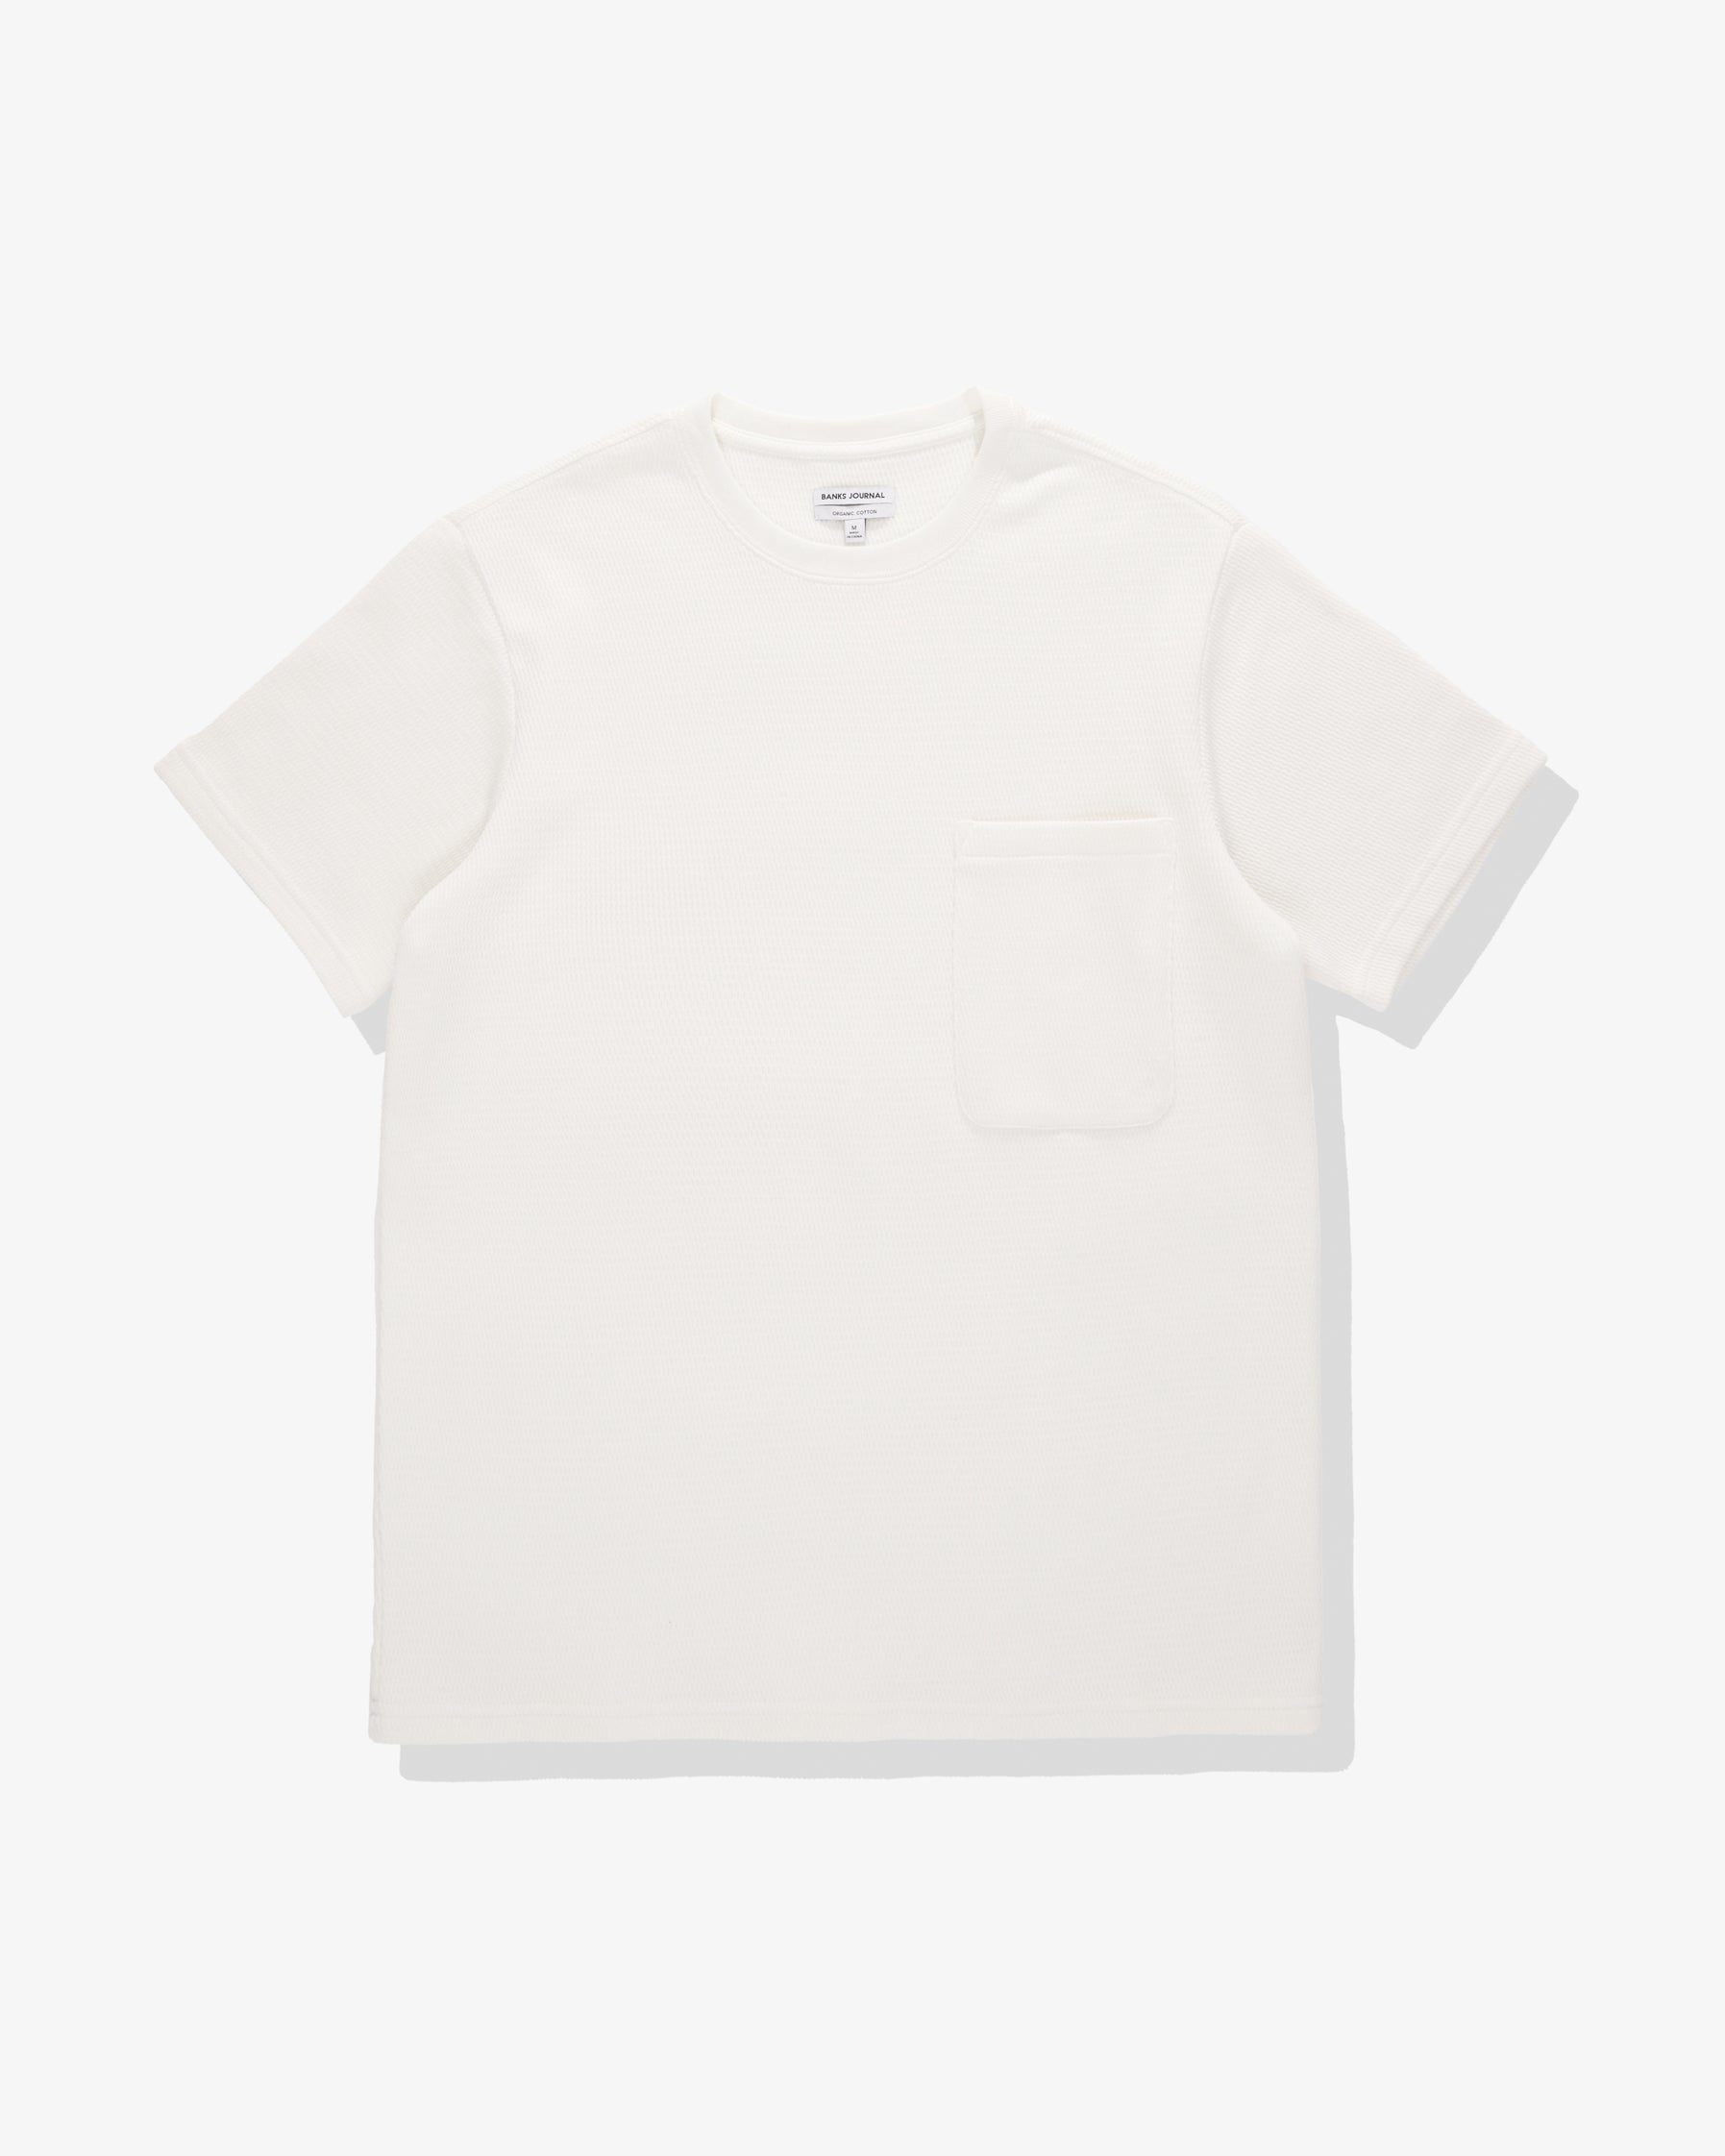 Thermal Deluxe Tee Shirt